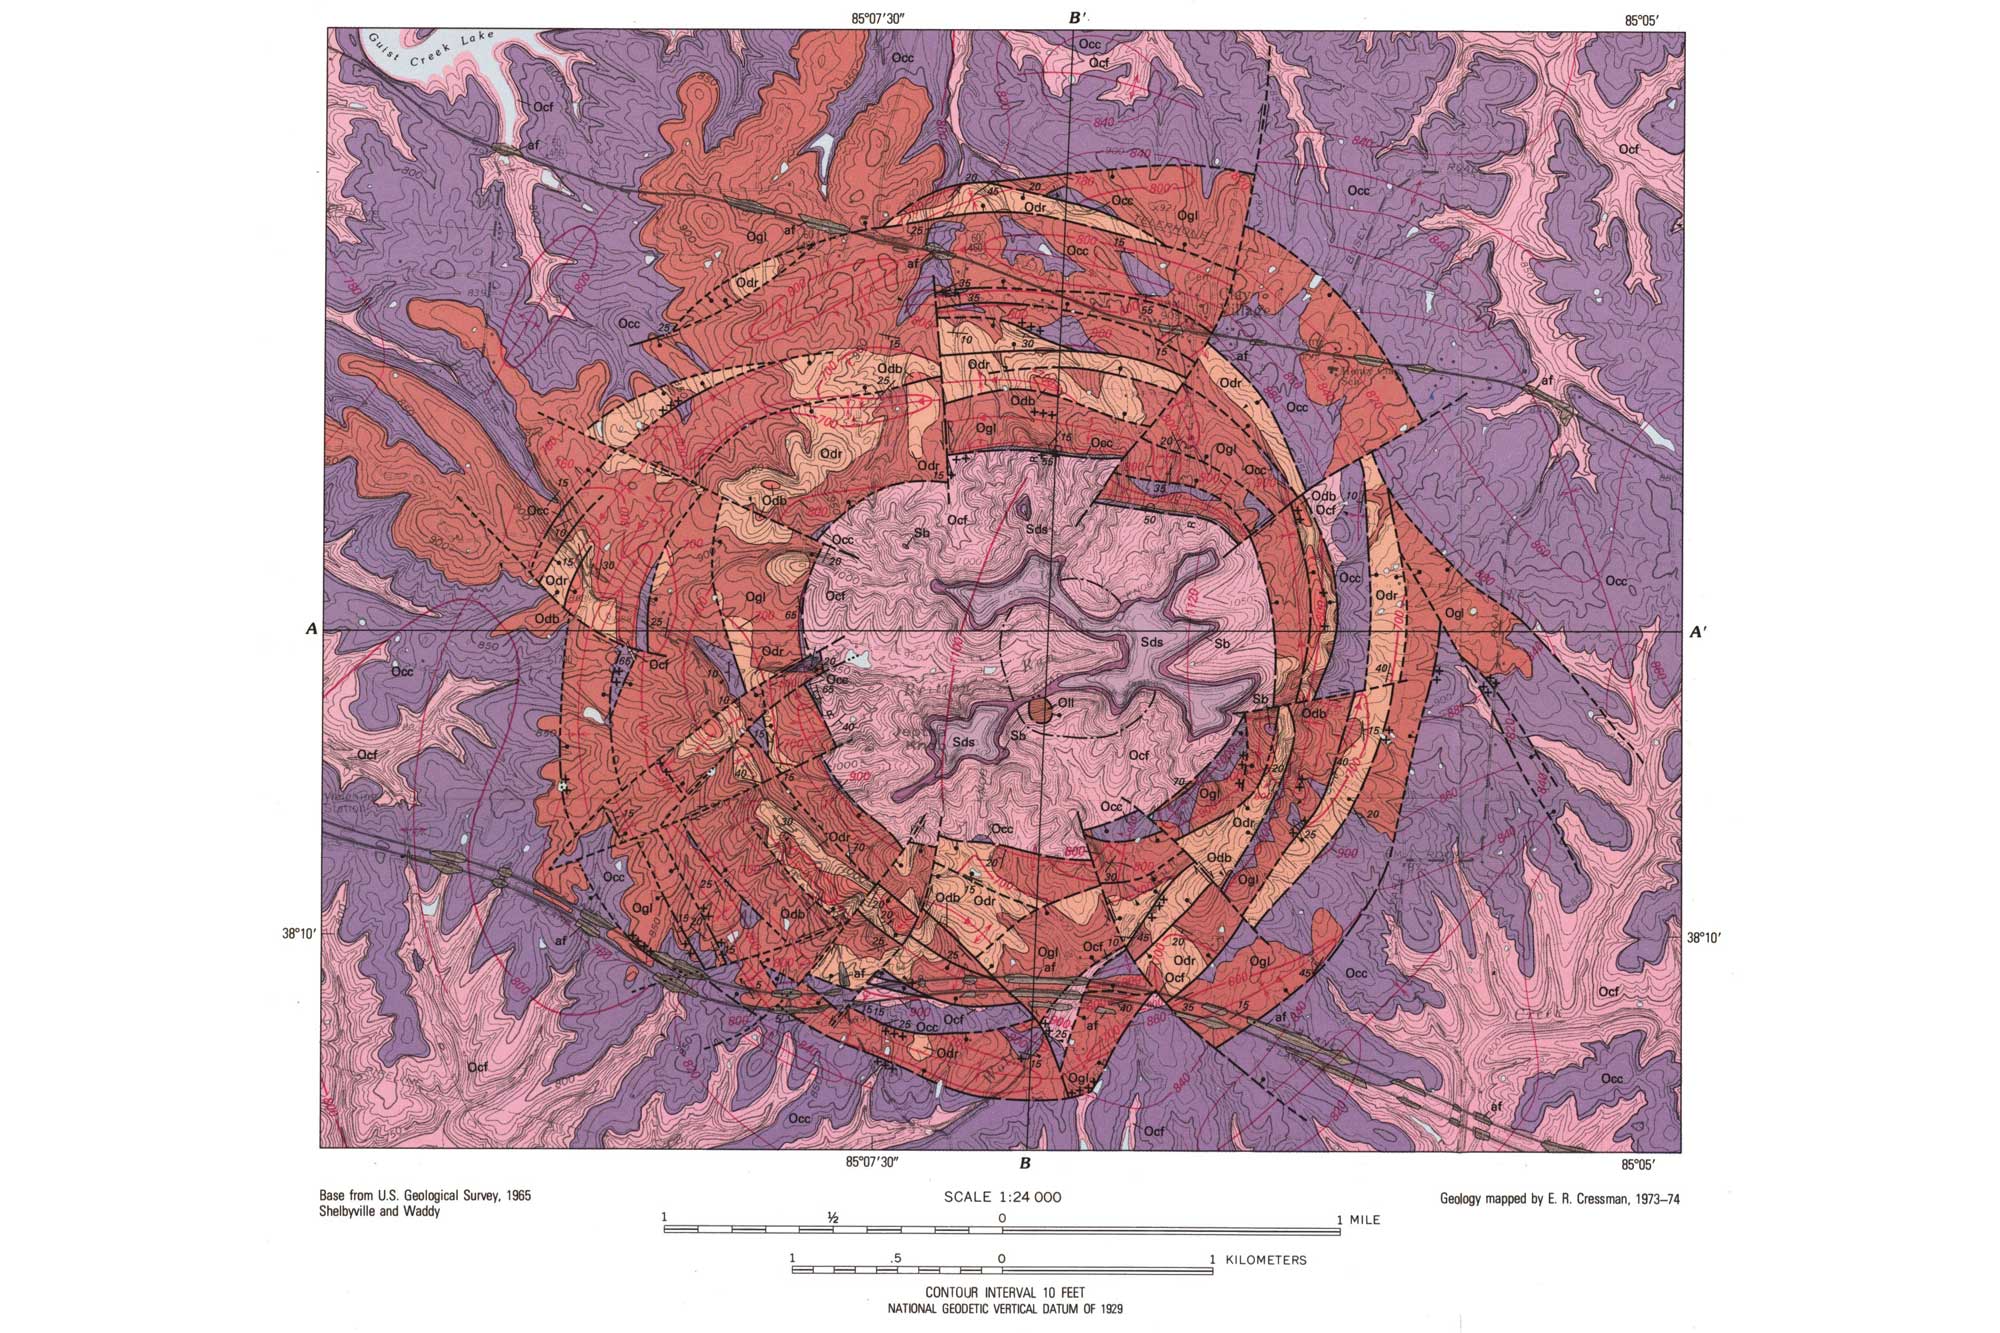 Geologic map depicting the ages of rock units associated with the Jeptha Knob impact structure in Shelby County, Kentucky.